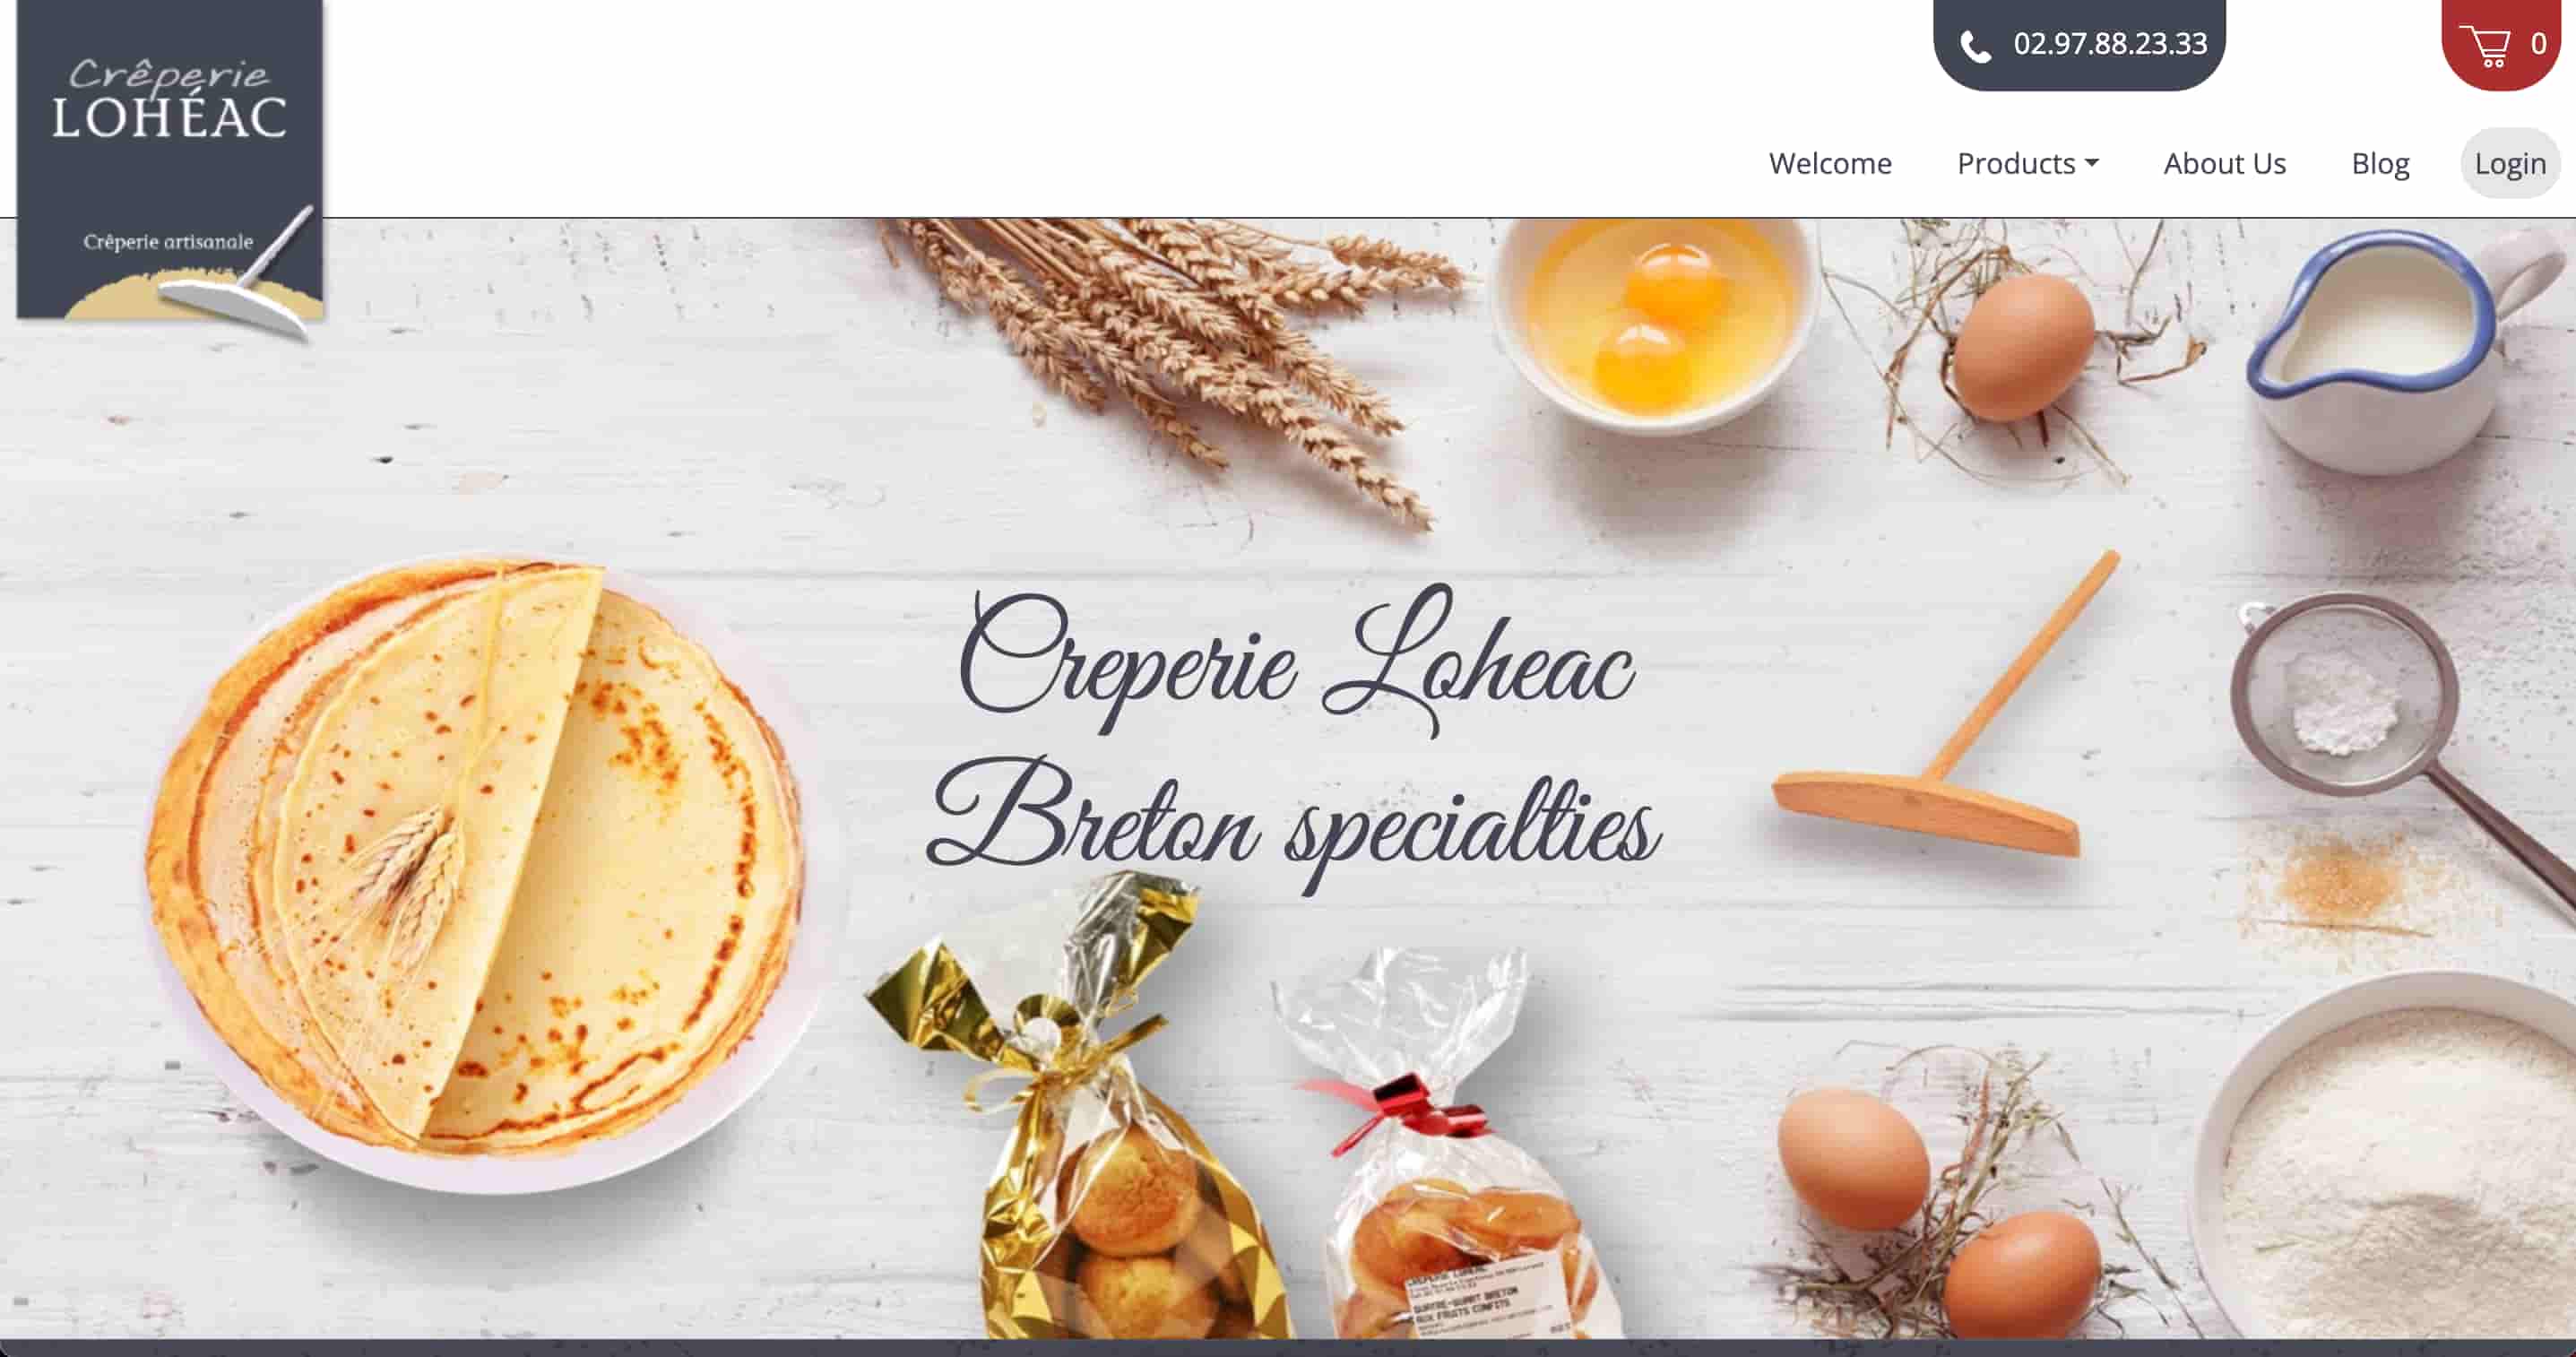 creperie loheac background image 